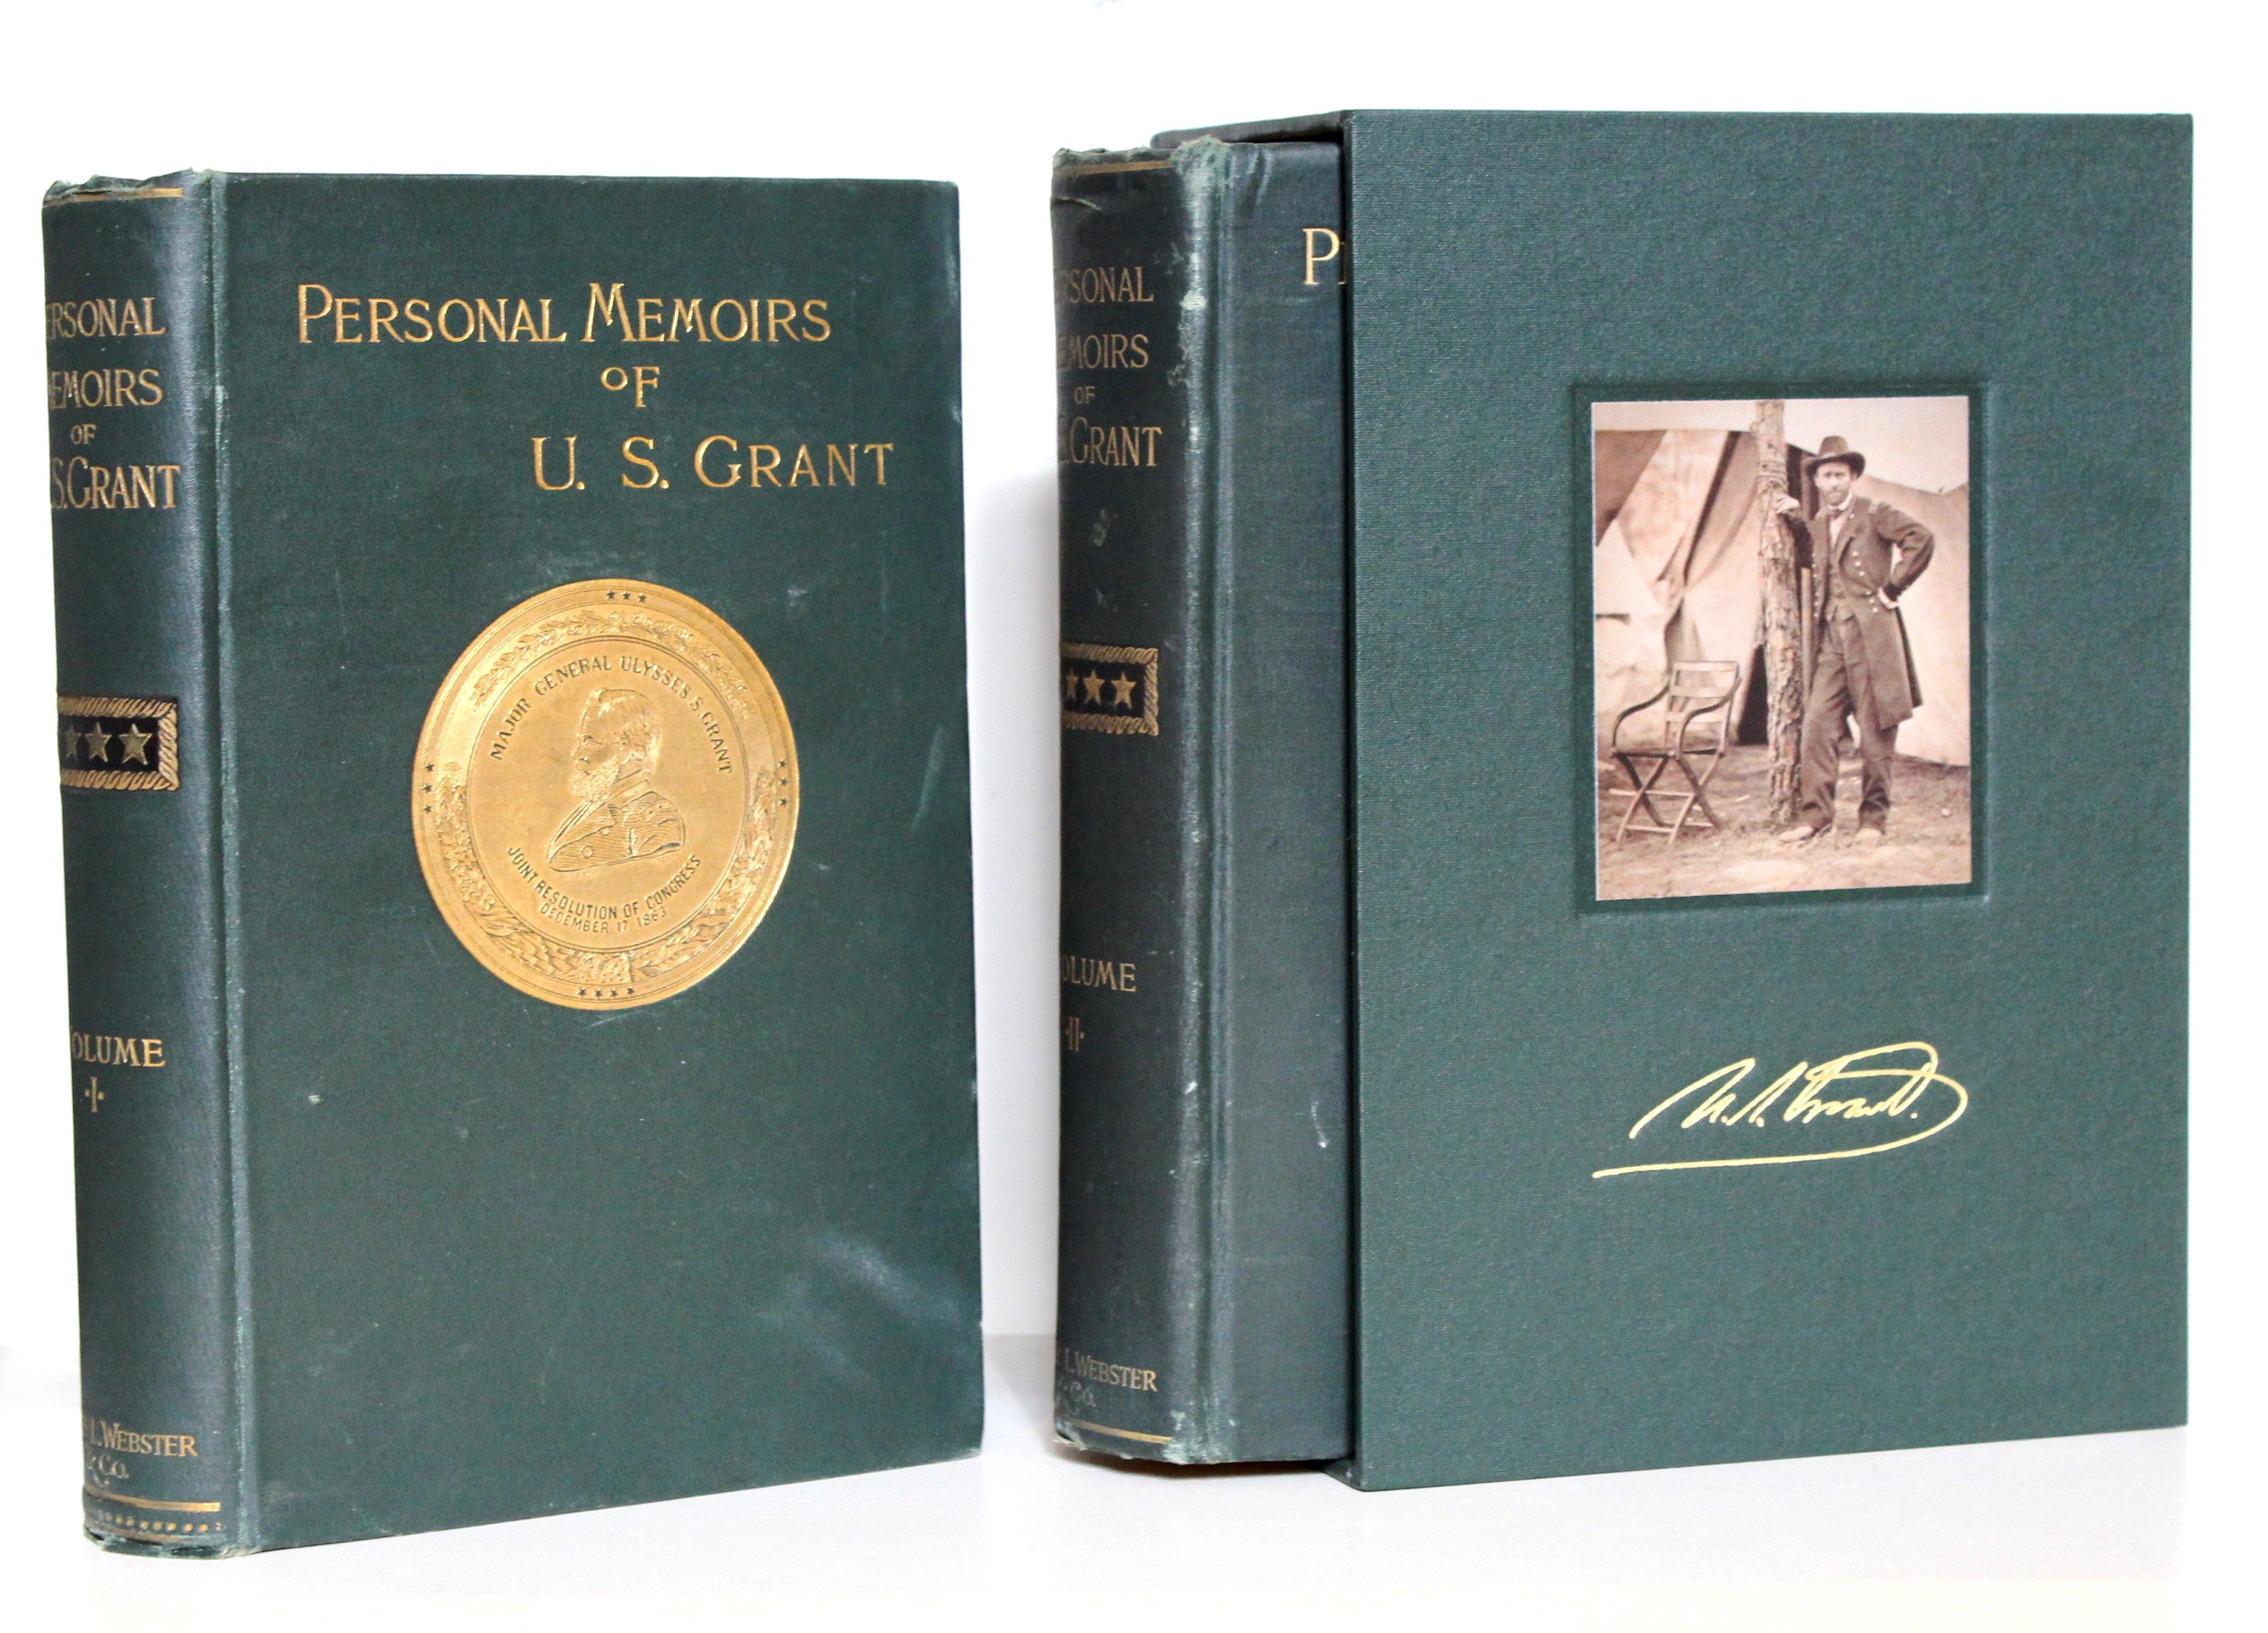 personal memoirs of u.s. grant first edition signed